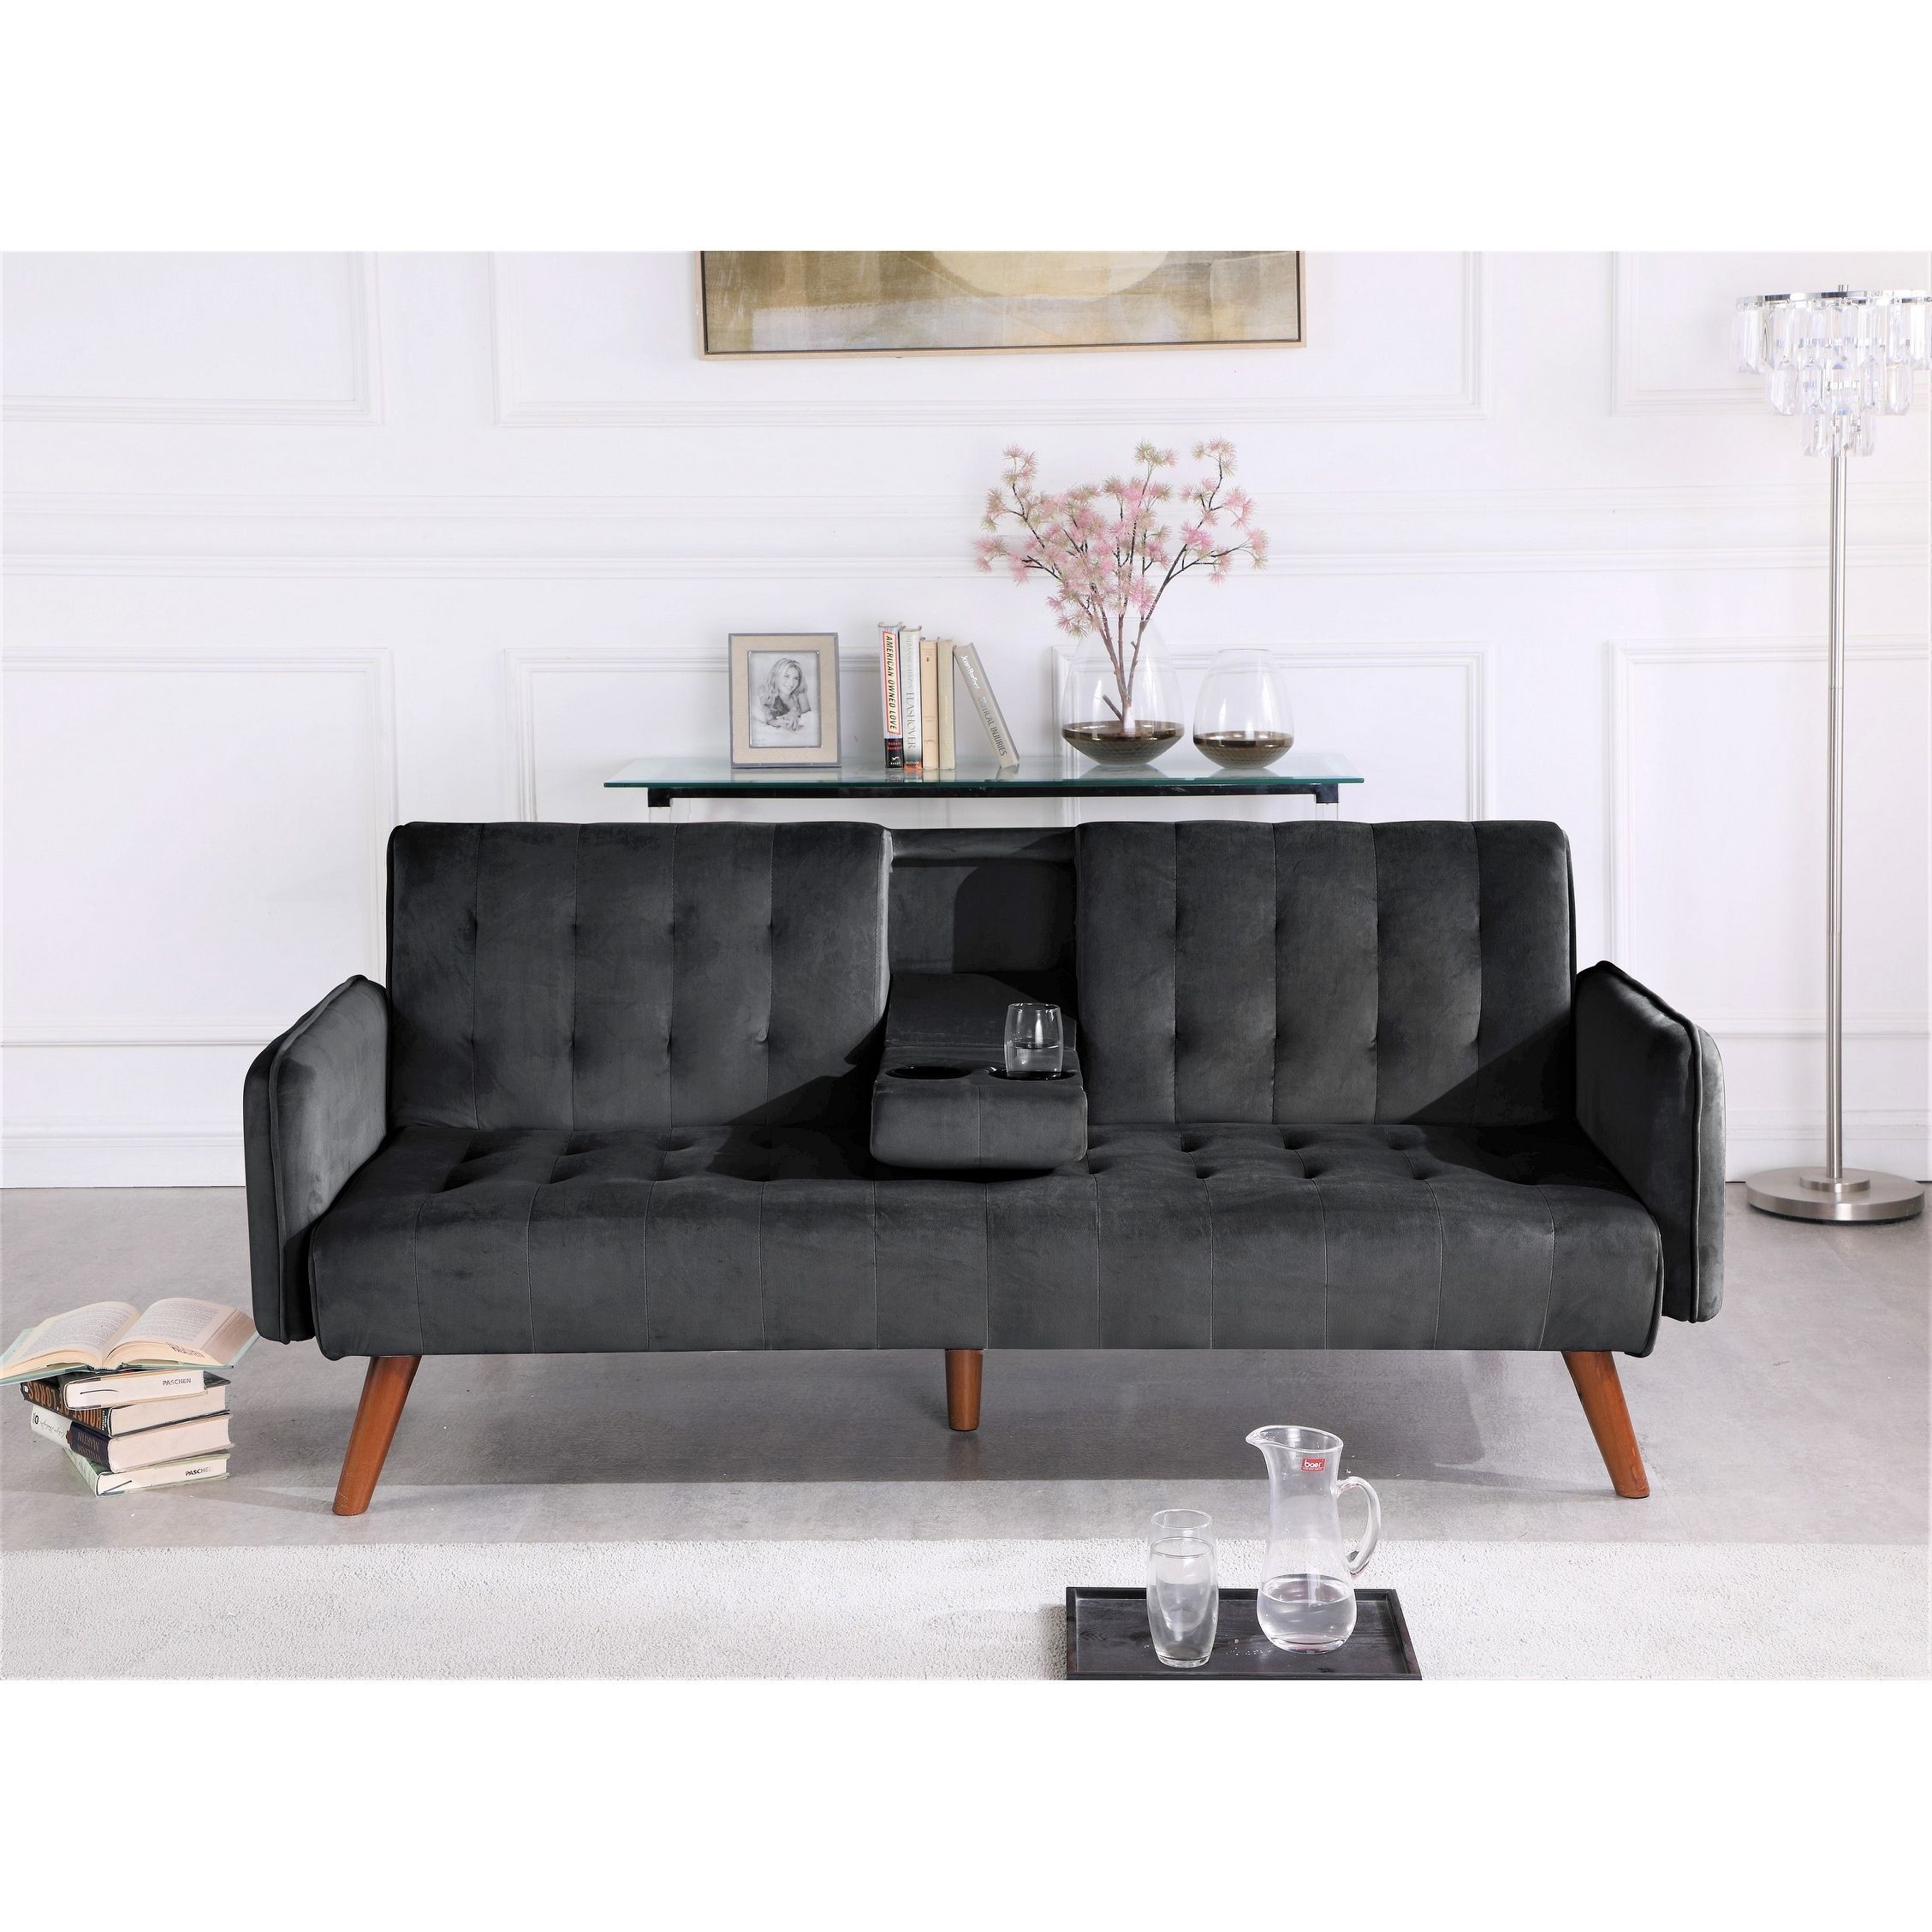 Us Pride Tufted Convertible Velvet Sofa Bed With Cup Holder – Overstock With 66" Convertible Velvet Sofa Beds (View 10 of 20)